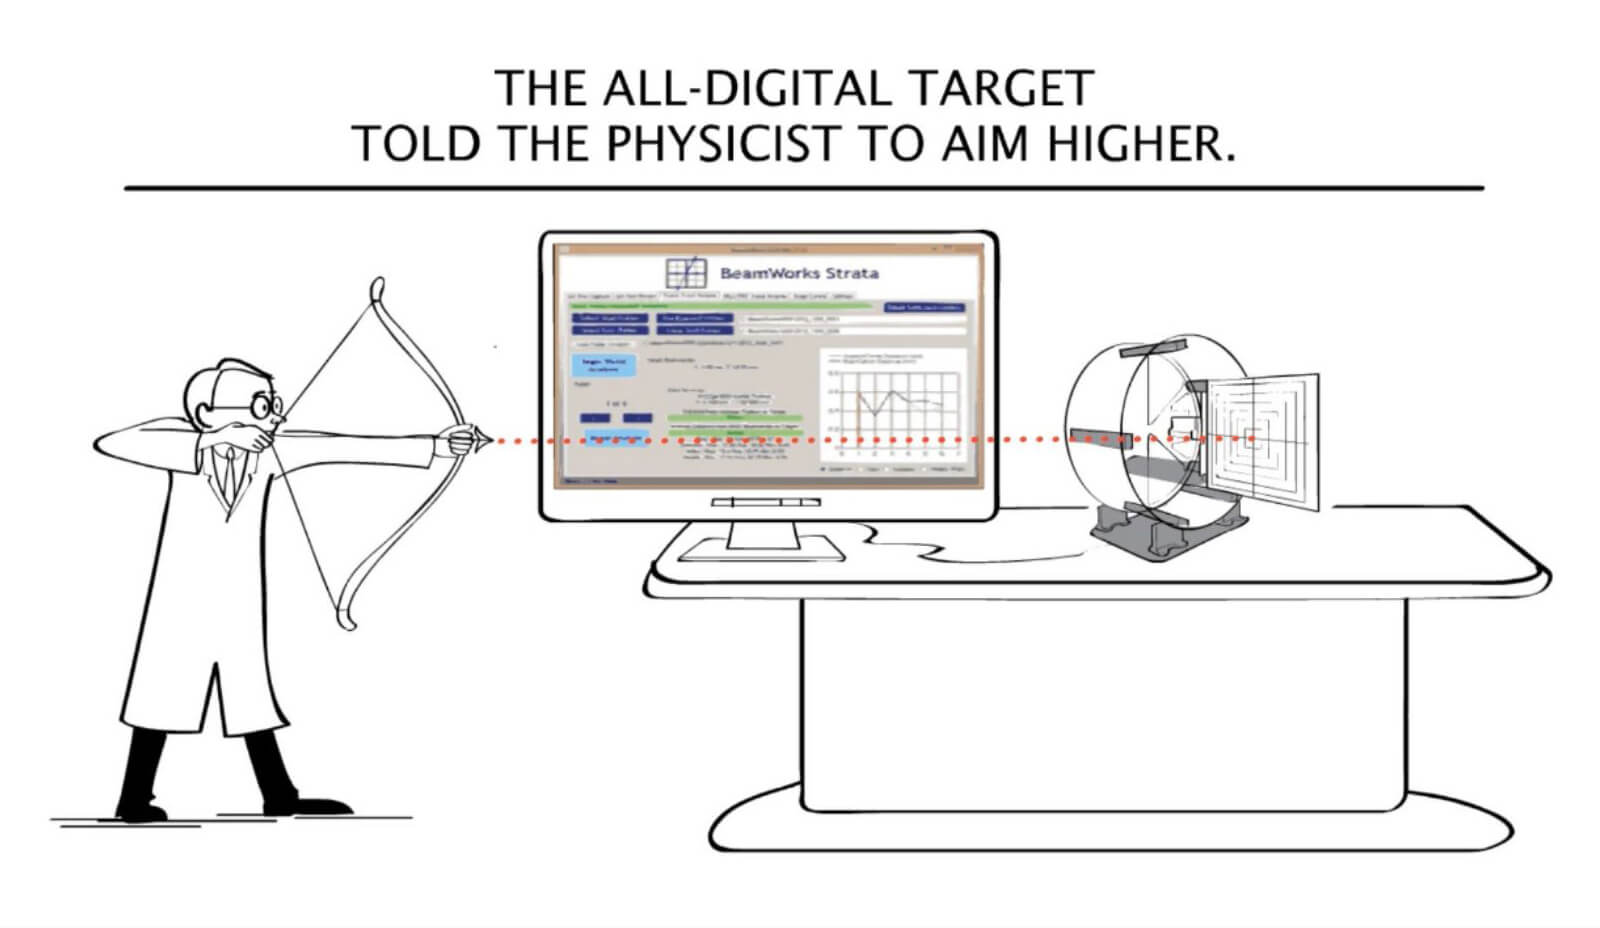 The all-digital target told the physicist to aim higher.